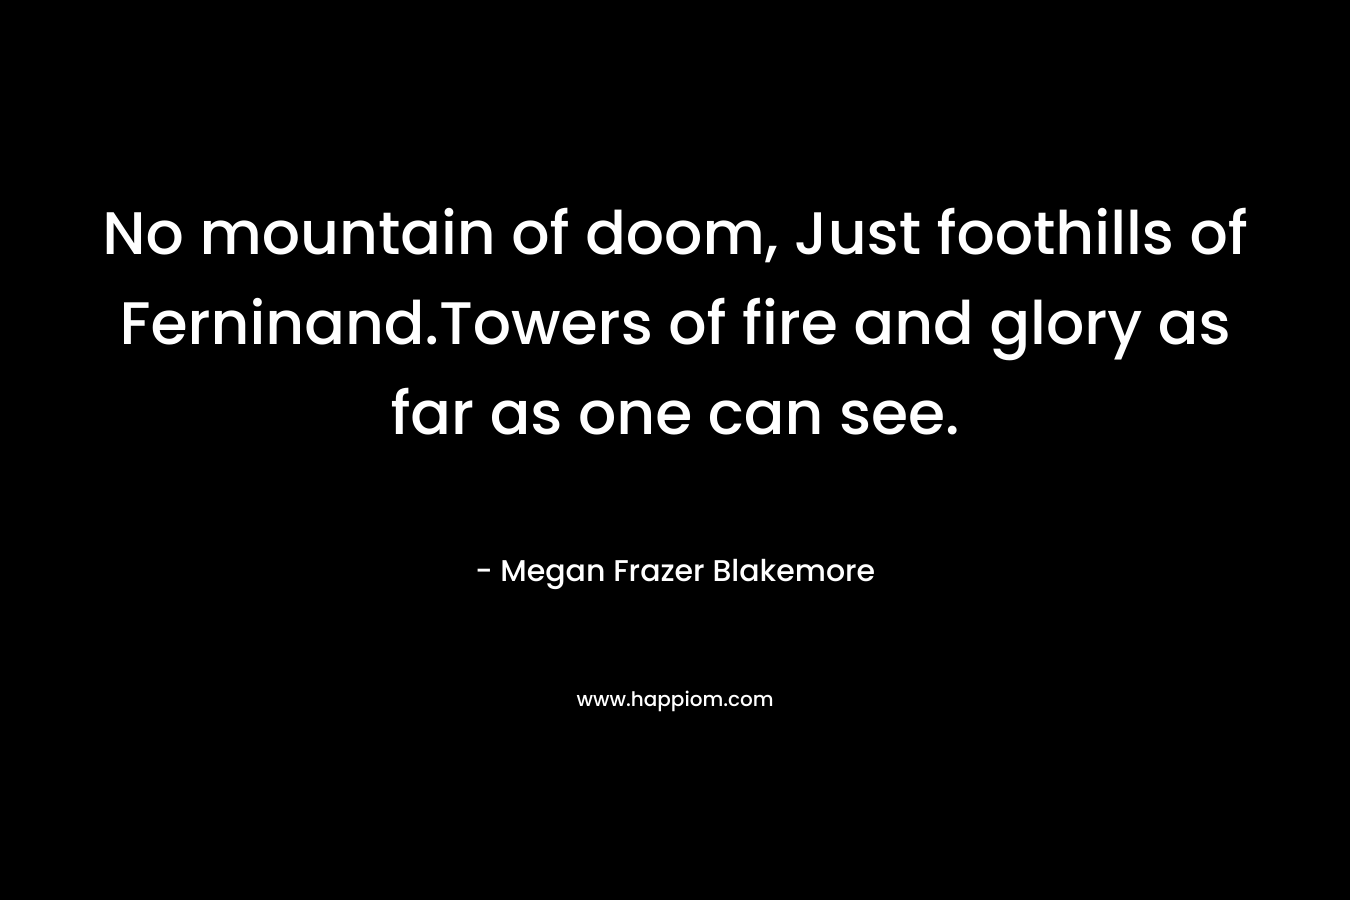 No mountain of doom, Just foothills of Ferninand.Towers of fire and glory as far as one can see. – Megan Frazer Blakemore